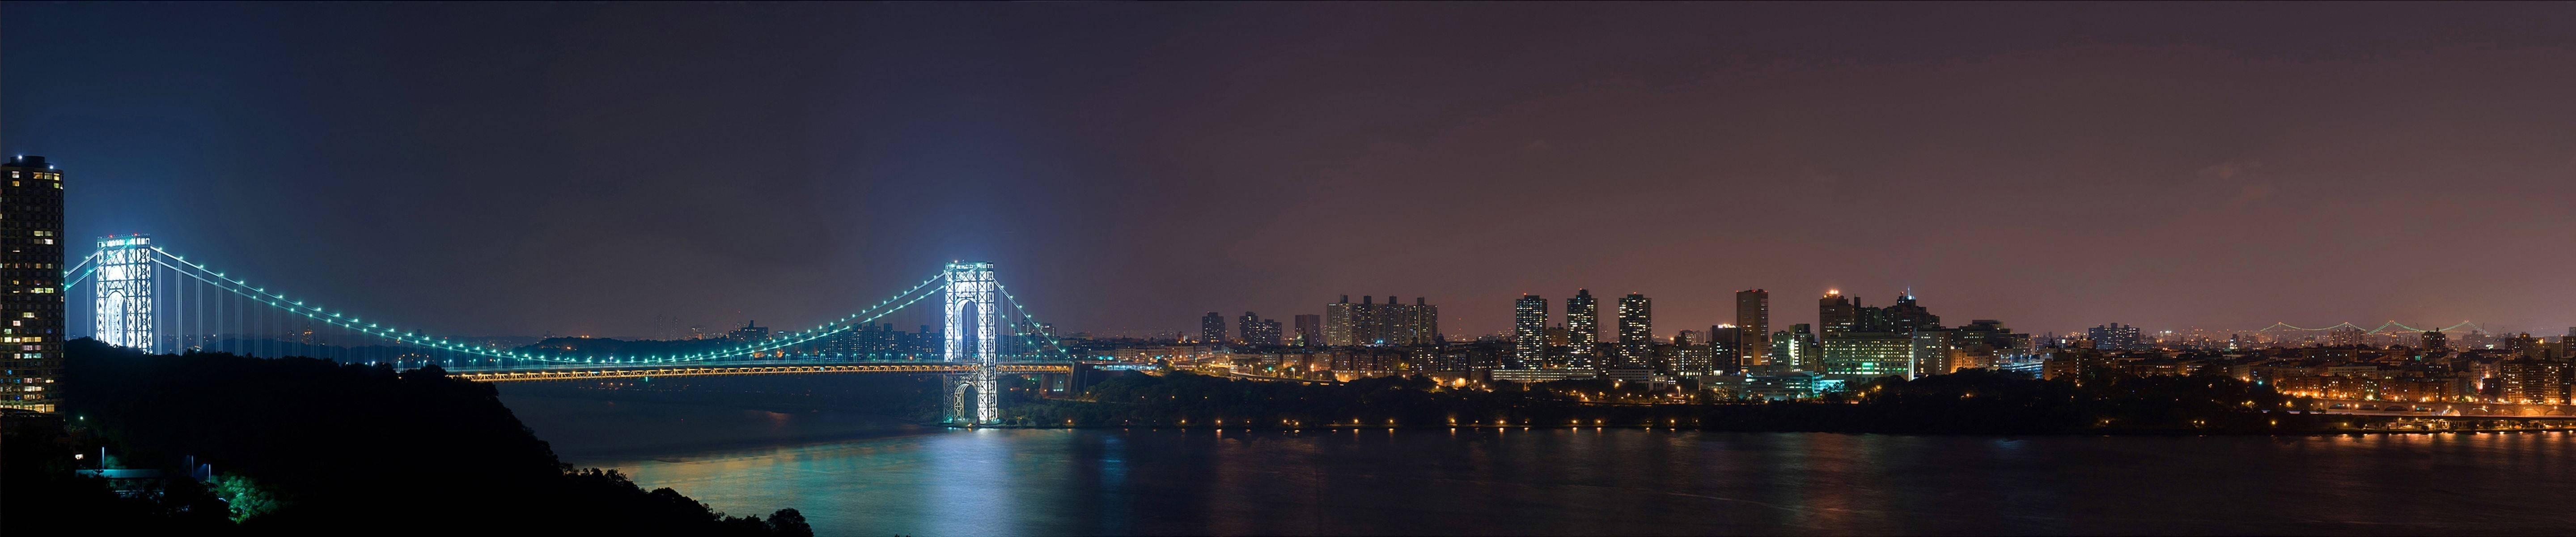 Triple Monitor showing city lights, tall buildings from afar and a long lighted bridge.